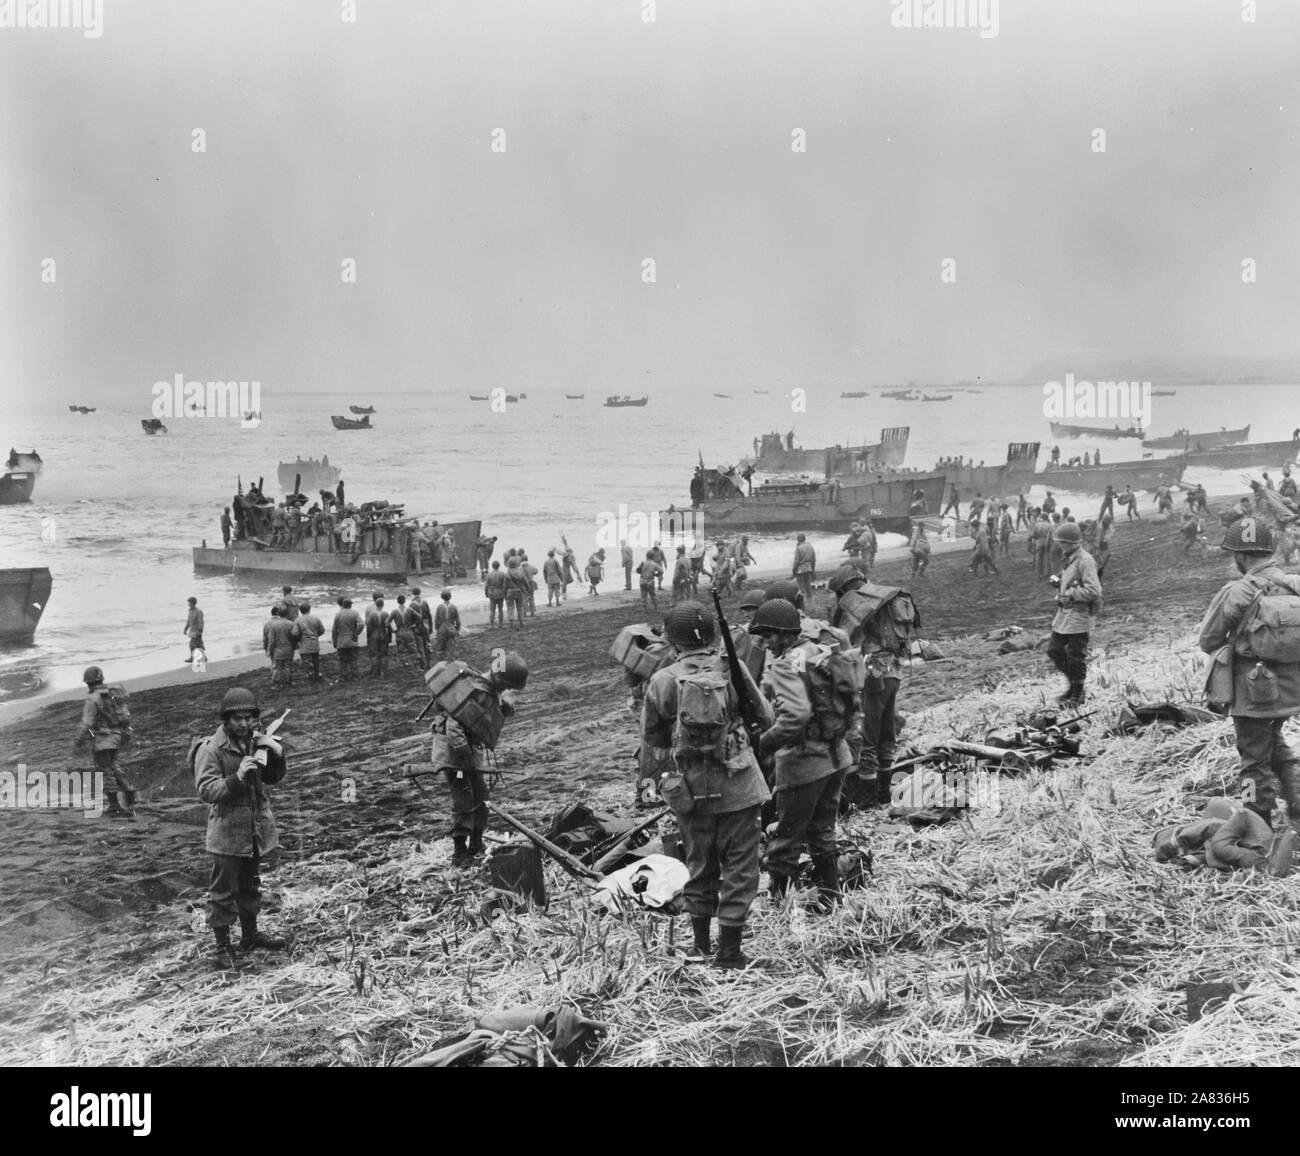 Attu, Aleutian Islands. Landing boats pouring soldiers and their equipment onto the beach at Massacre Bay. This is the Southern landing force. May 11, 1943 Stock Photo